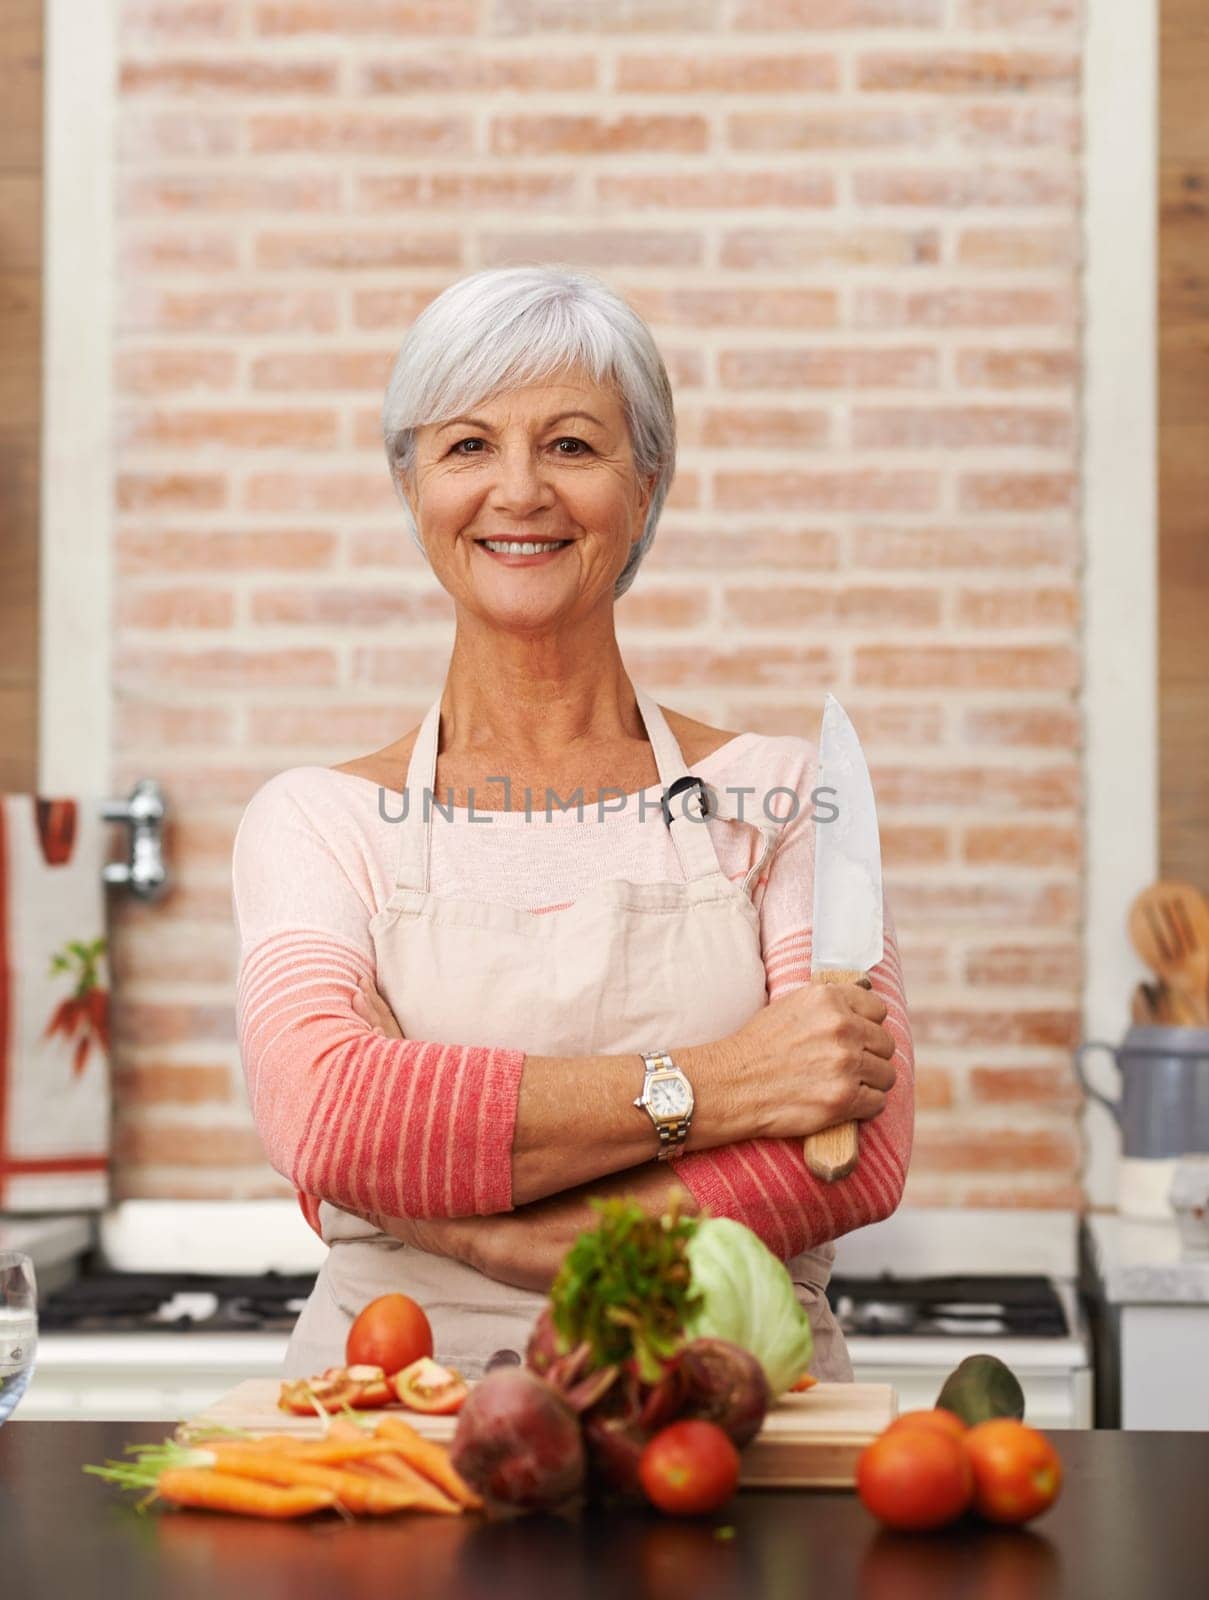 Senior woman and cooking with knife in kitchen or confident, tomato or carrots for diet. Female chef or portrait with healthy vegetables for nutrition, green lettuce and onion in retirement home.